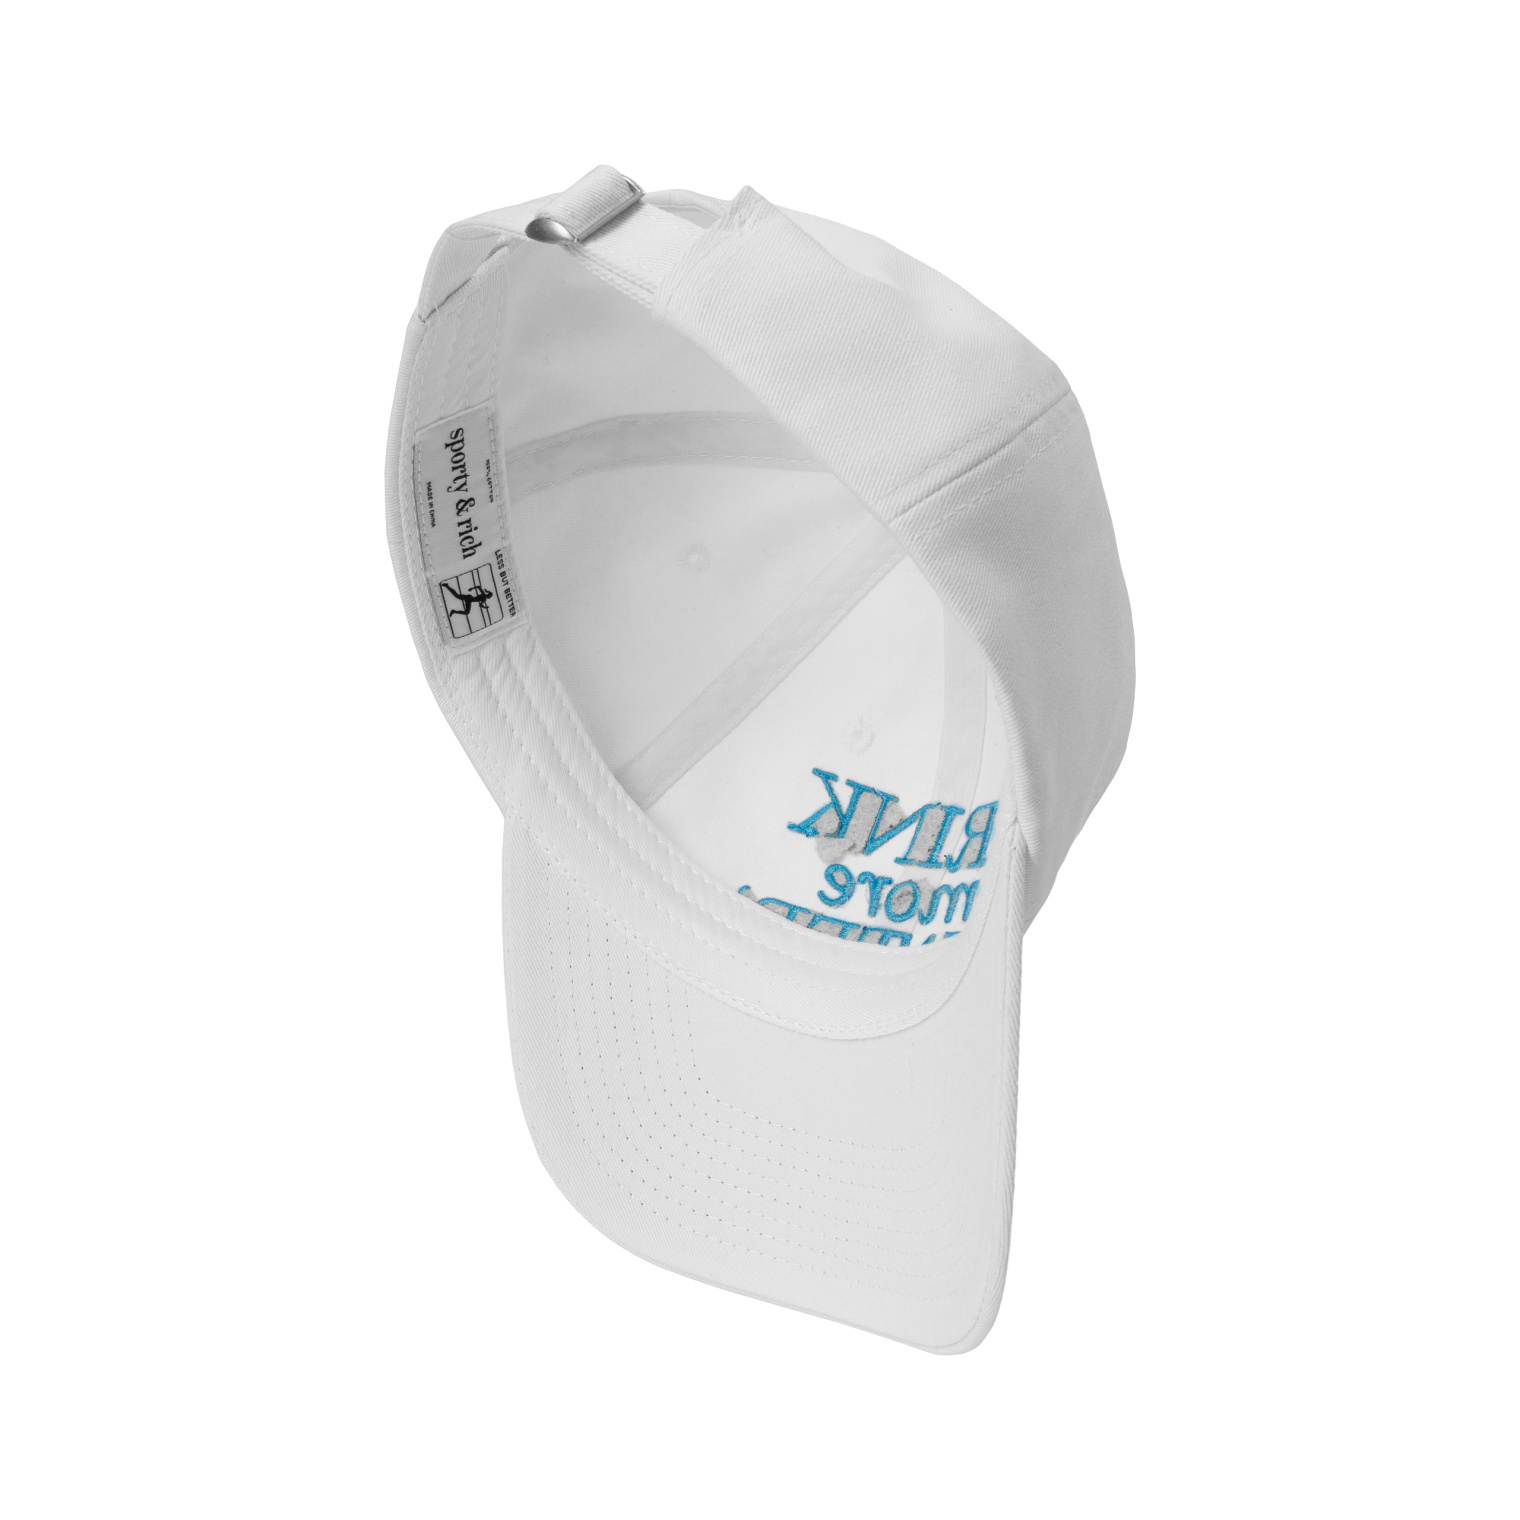 SPORTY & RICH \'Drink More Water\' embroidered cap